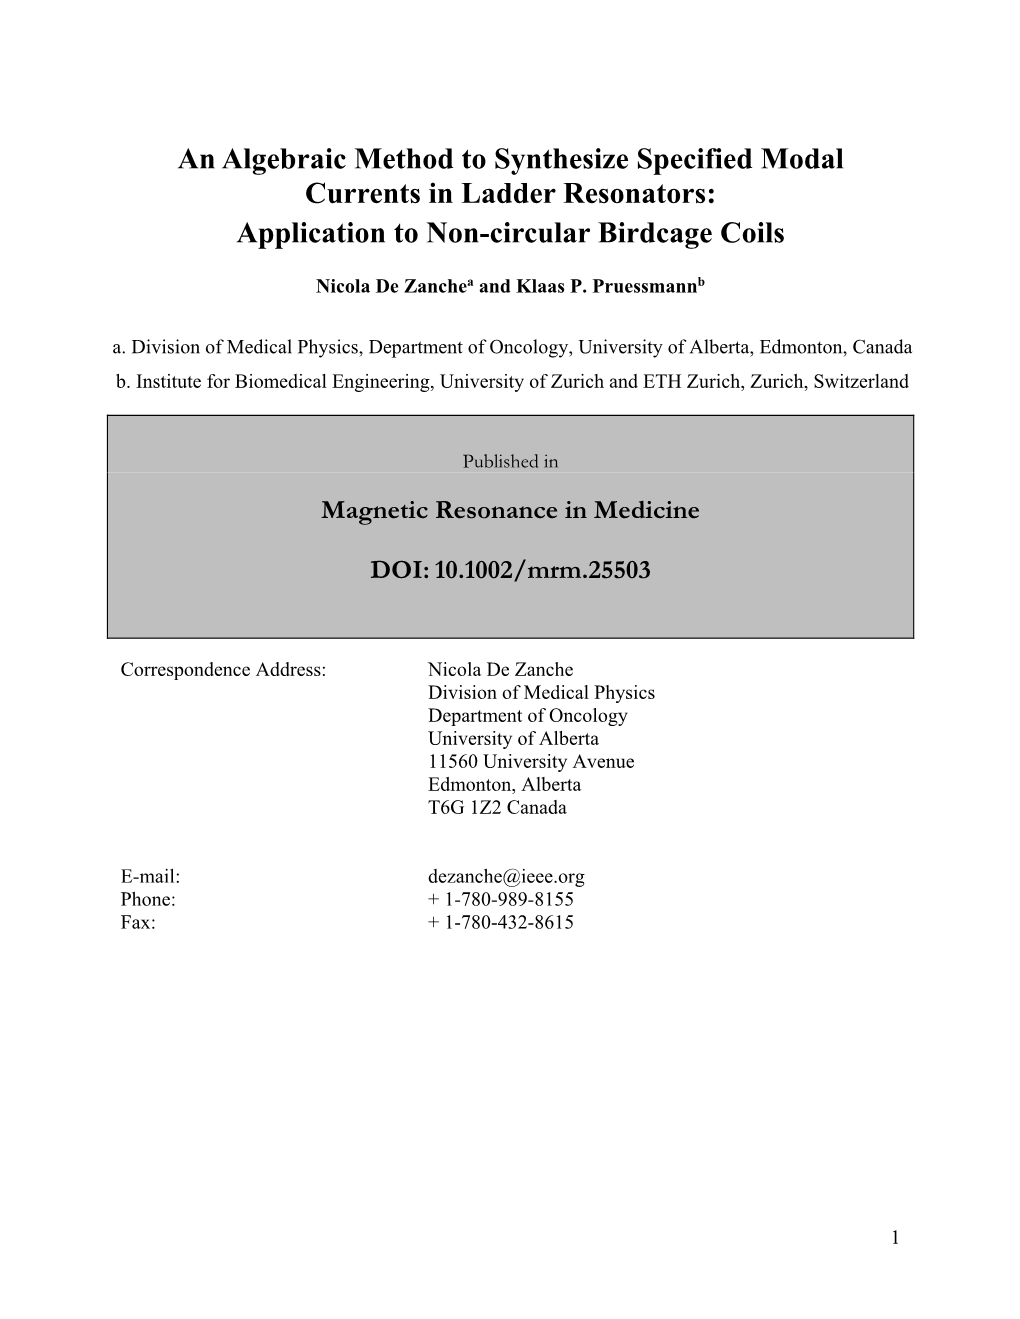 An Algebraic Method to Synthesize Specified Modal Currents in Ladder Resonators: Application to Non-Circular Birdcage Coils